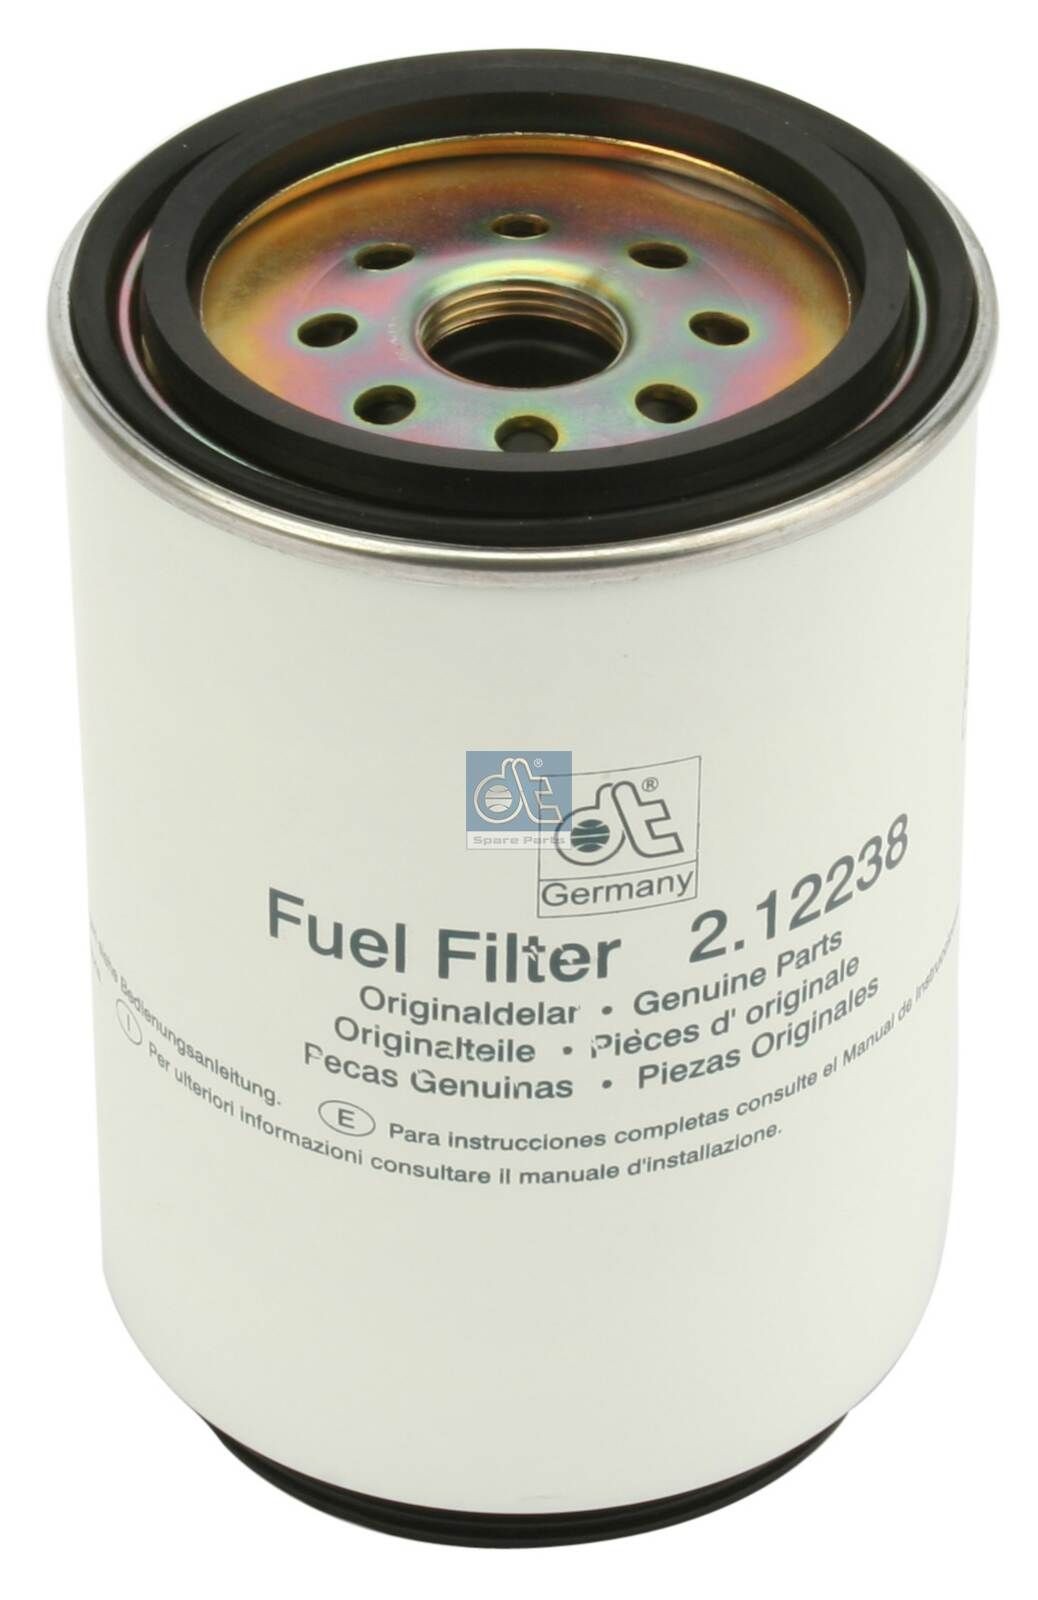 WK 1060/5 x DT Spare Parts 2.12238 Fuel filter 00 0773 314 0